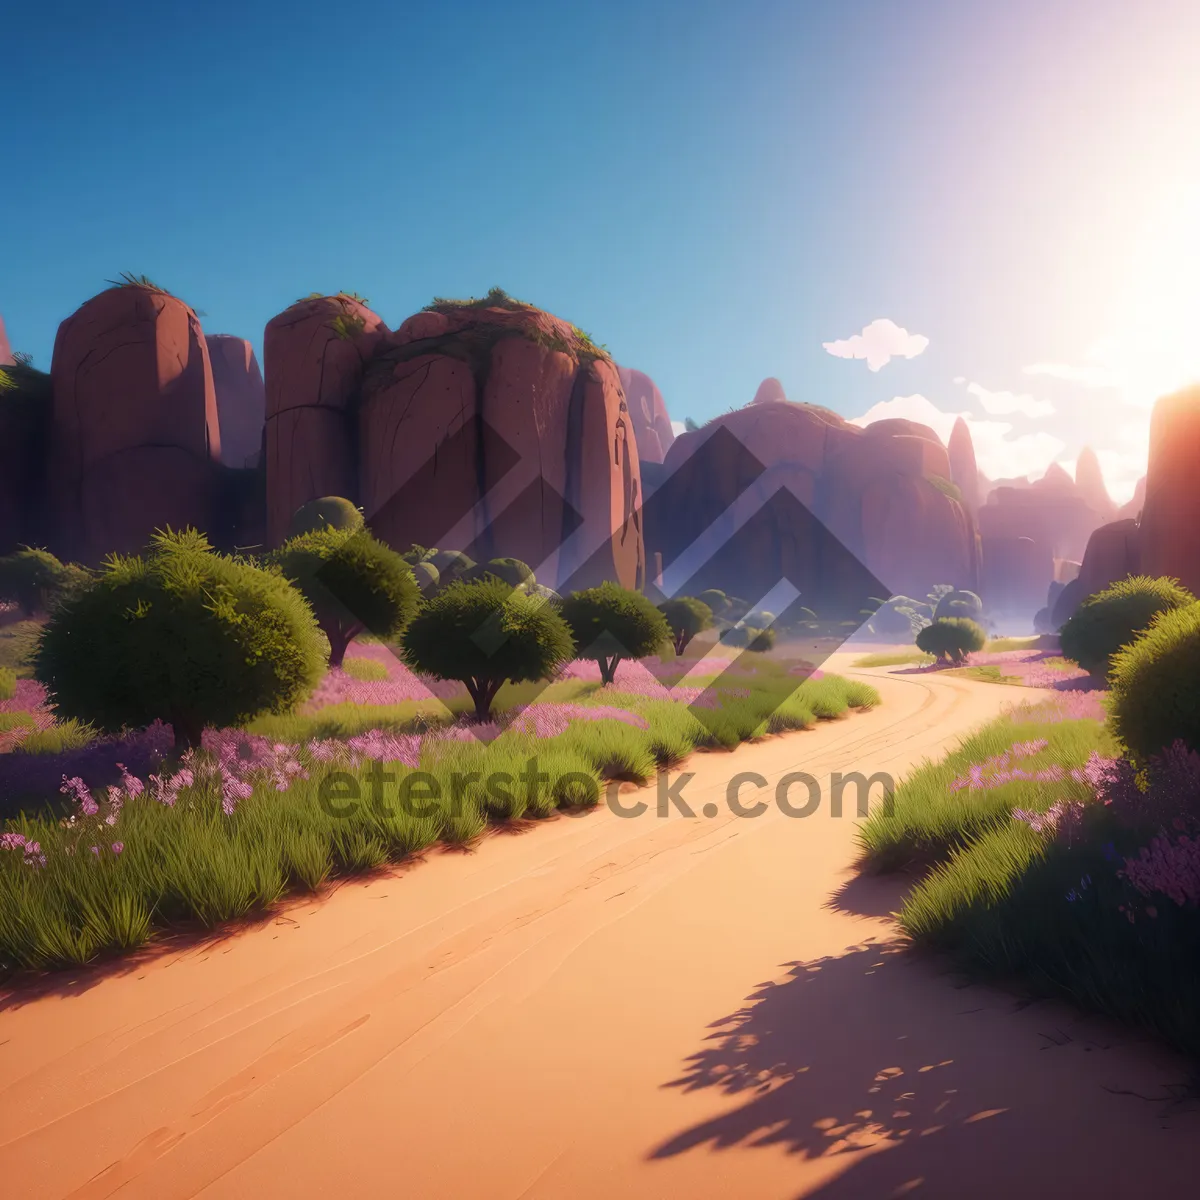 Picture of Sunset Canyon Landscape with Majestic Mountains